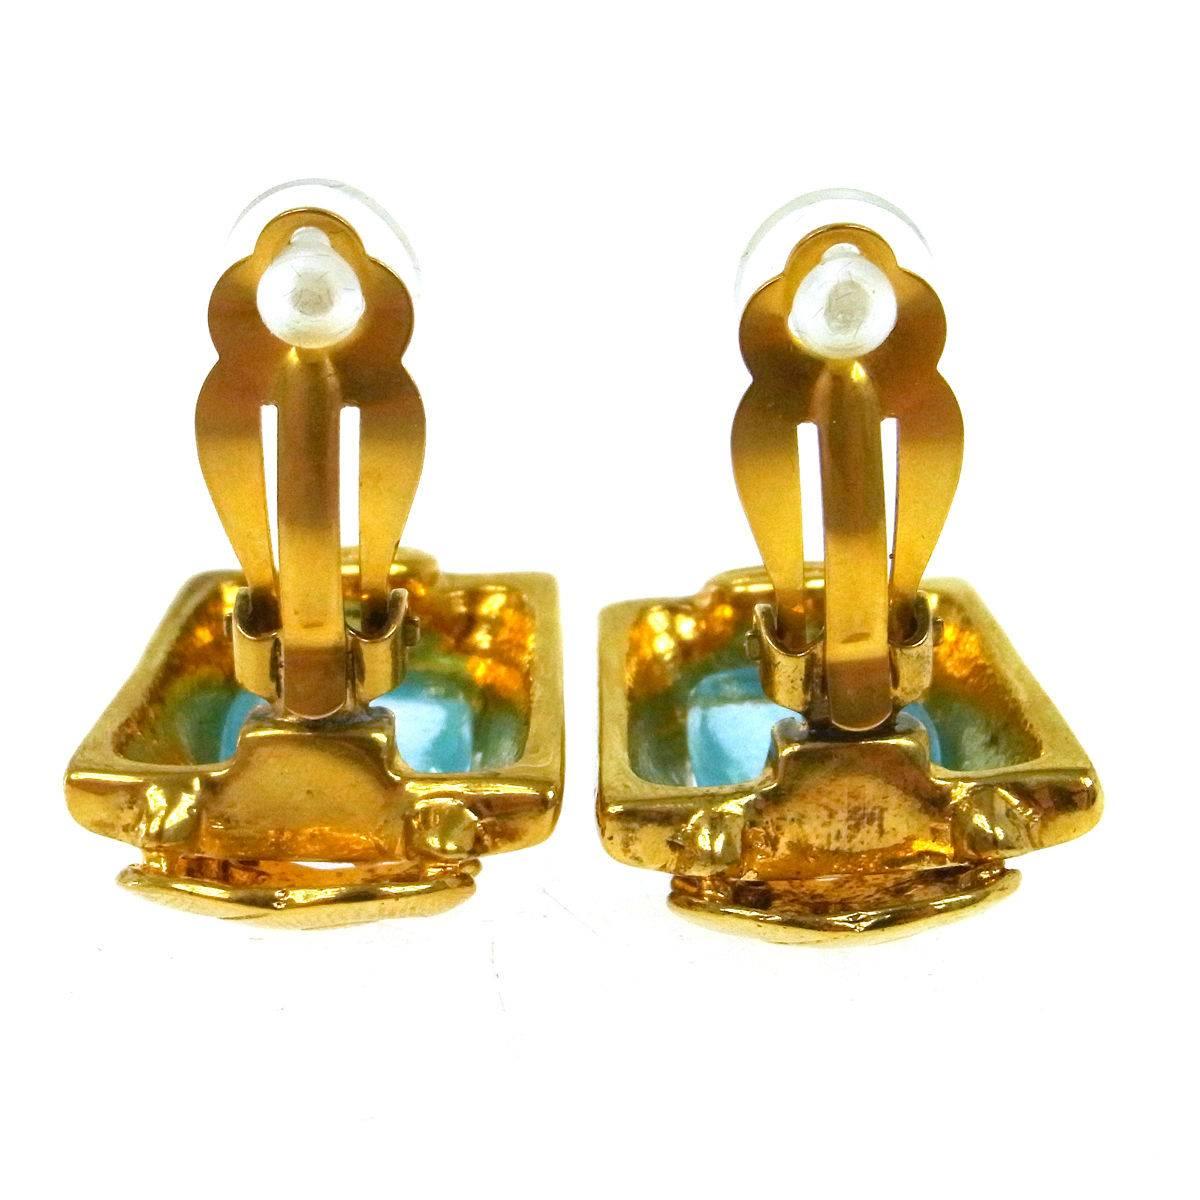 Chanel Vintage Gold Charm Tiffany Blue Poured Glass Gripoix Evening Earrings in Box

Metal
Gold tone
Poured glass
Clip on closure
Made in France
Measures 1